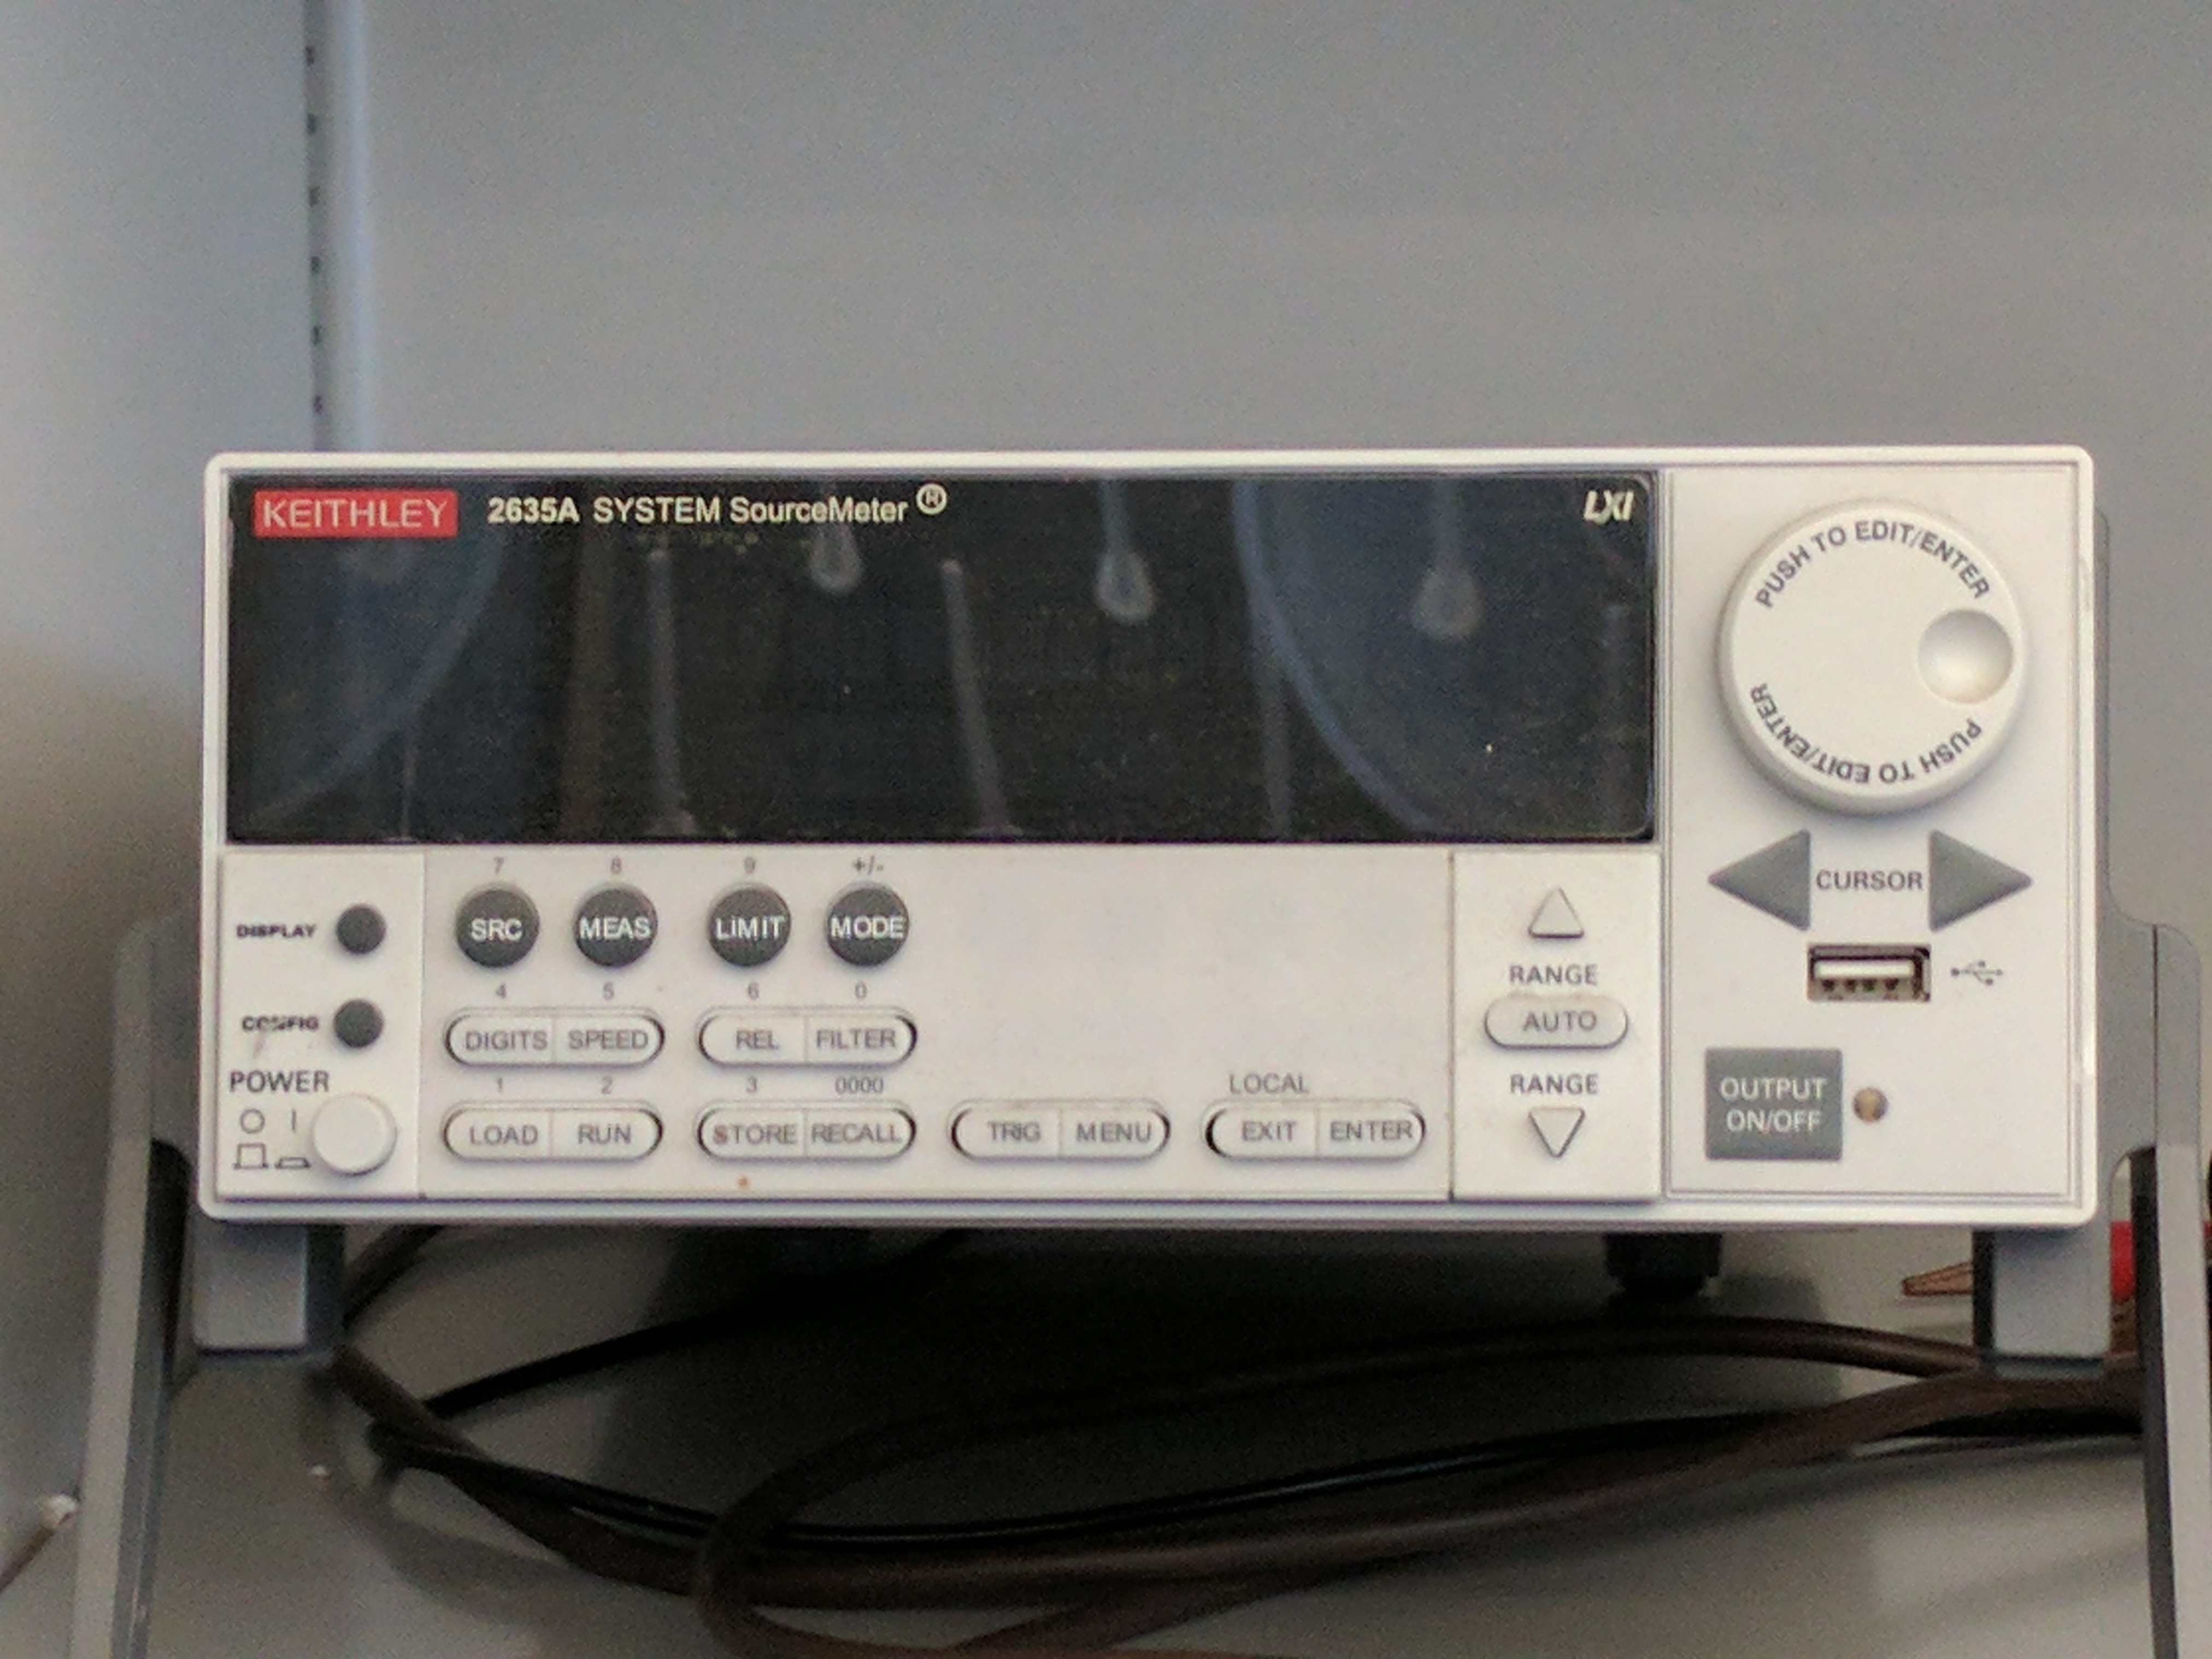 Keithley Source Meter: This instrument measures current and voltage or provides a constant current source for electrochemical depositions.